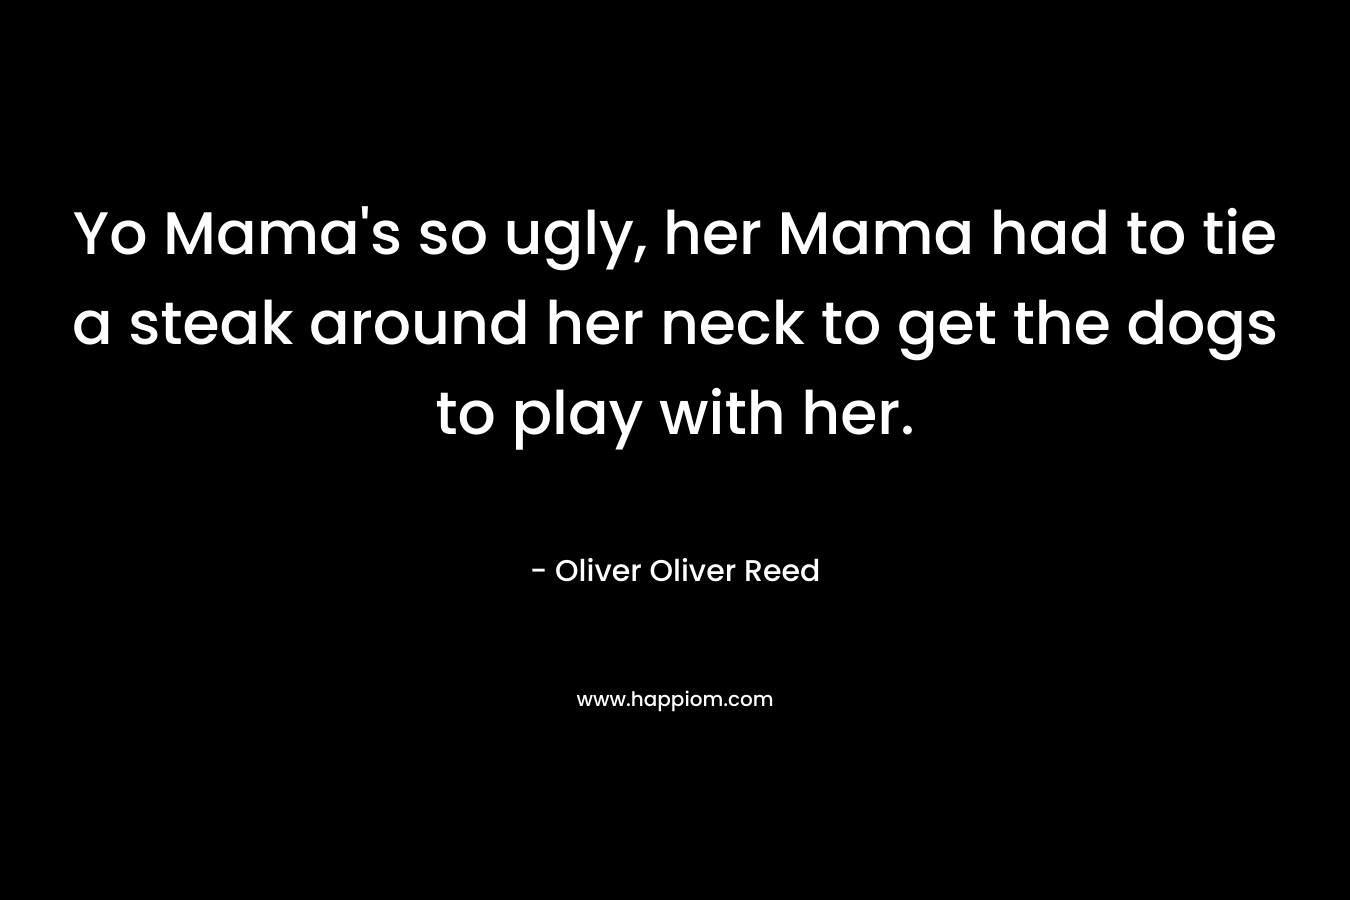 Yo Mama’s so ugly, her Mama had to tie a steak around her neck to get the dogs to play with her. – Oliver Oliver Reed